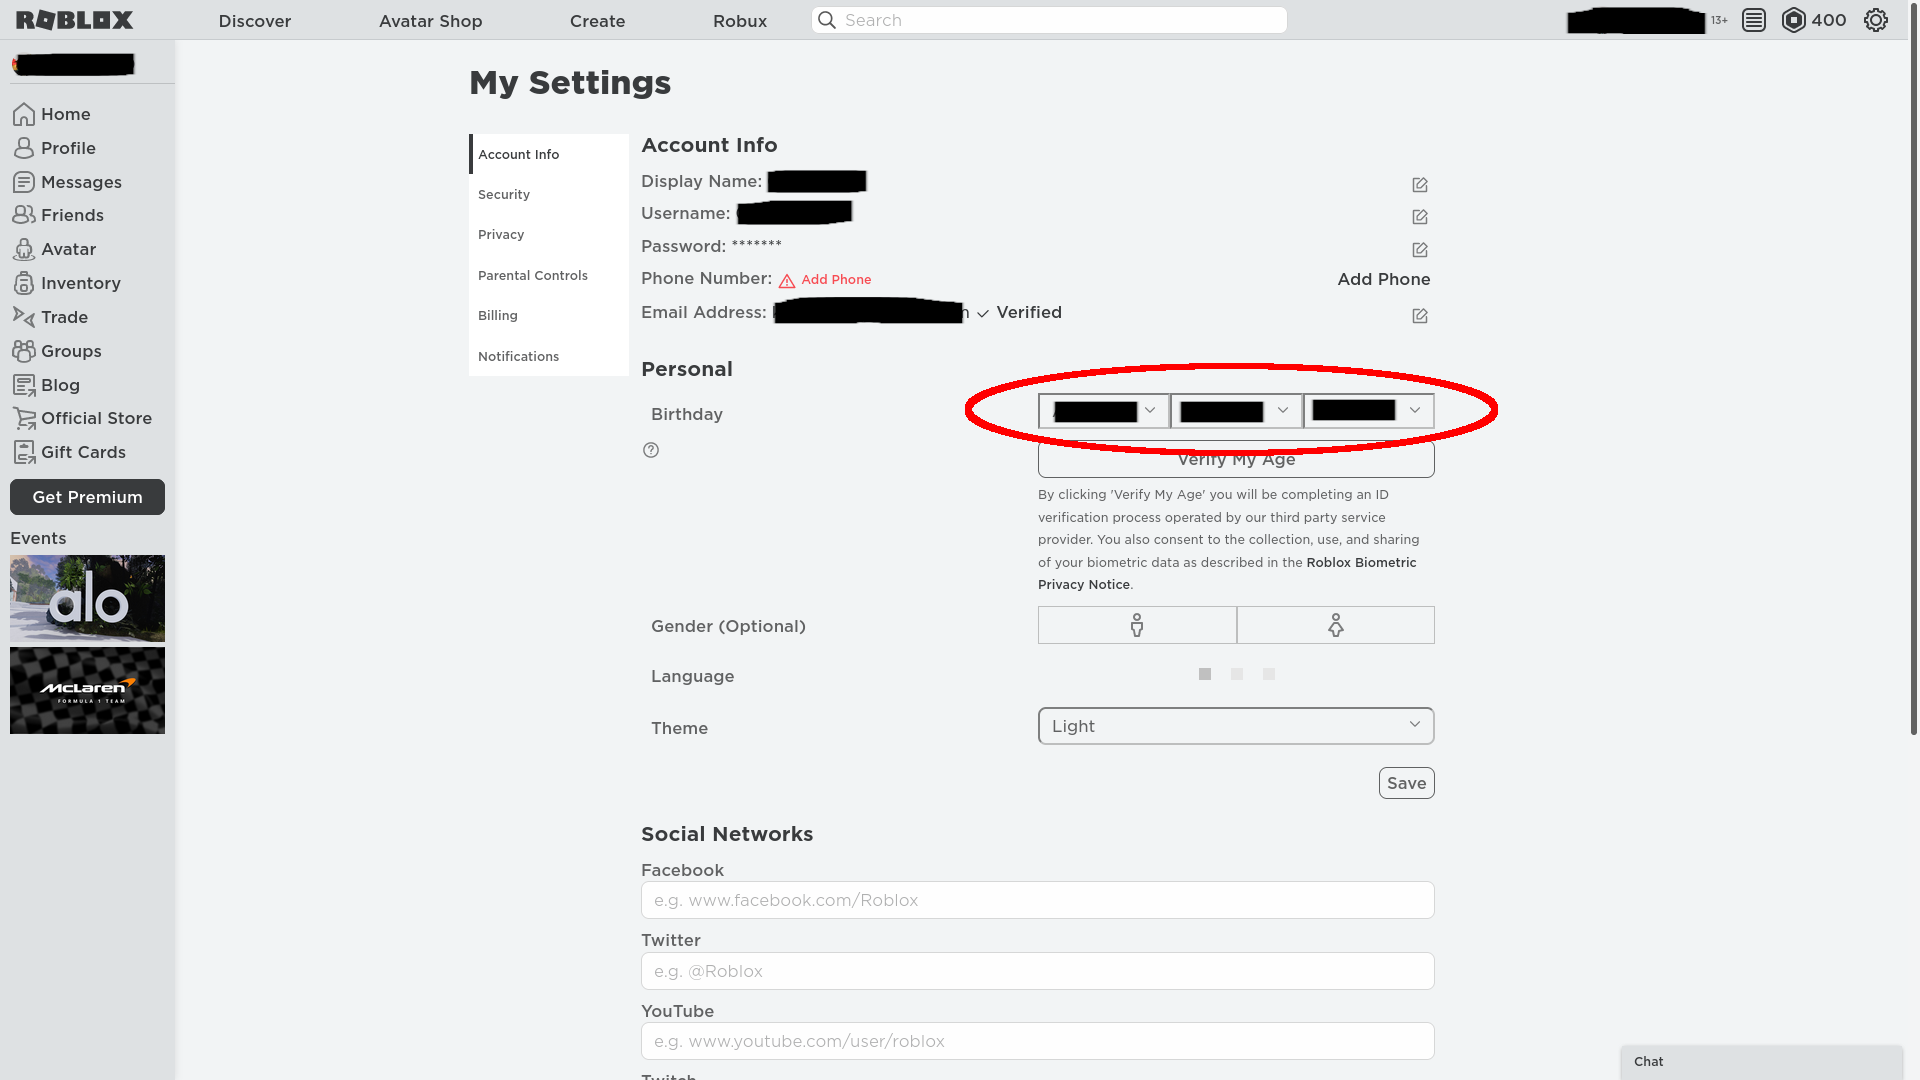 Roblox settings, birthday is cricled.